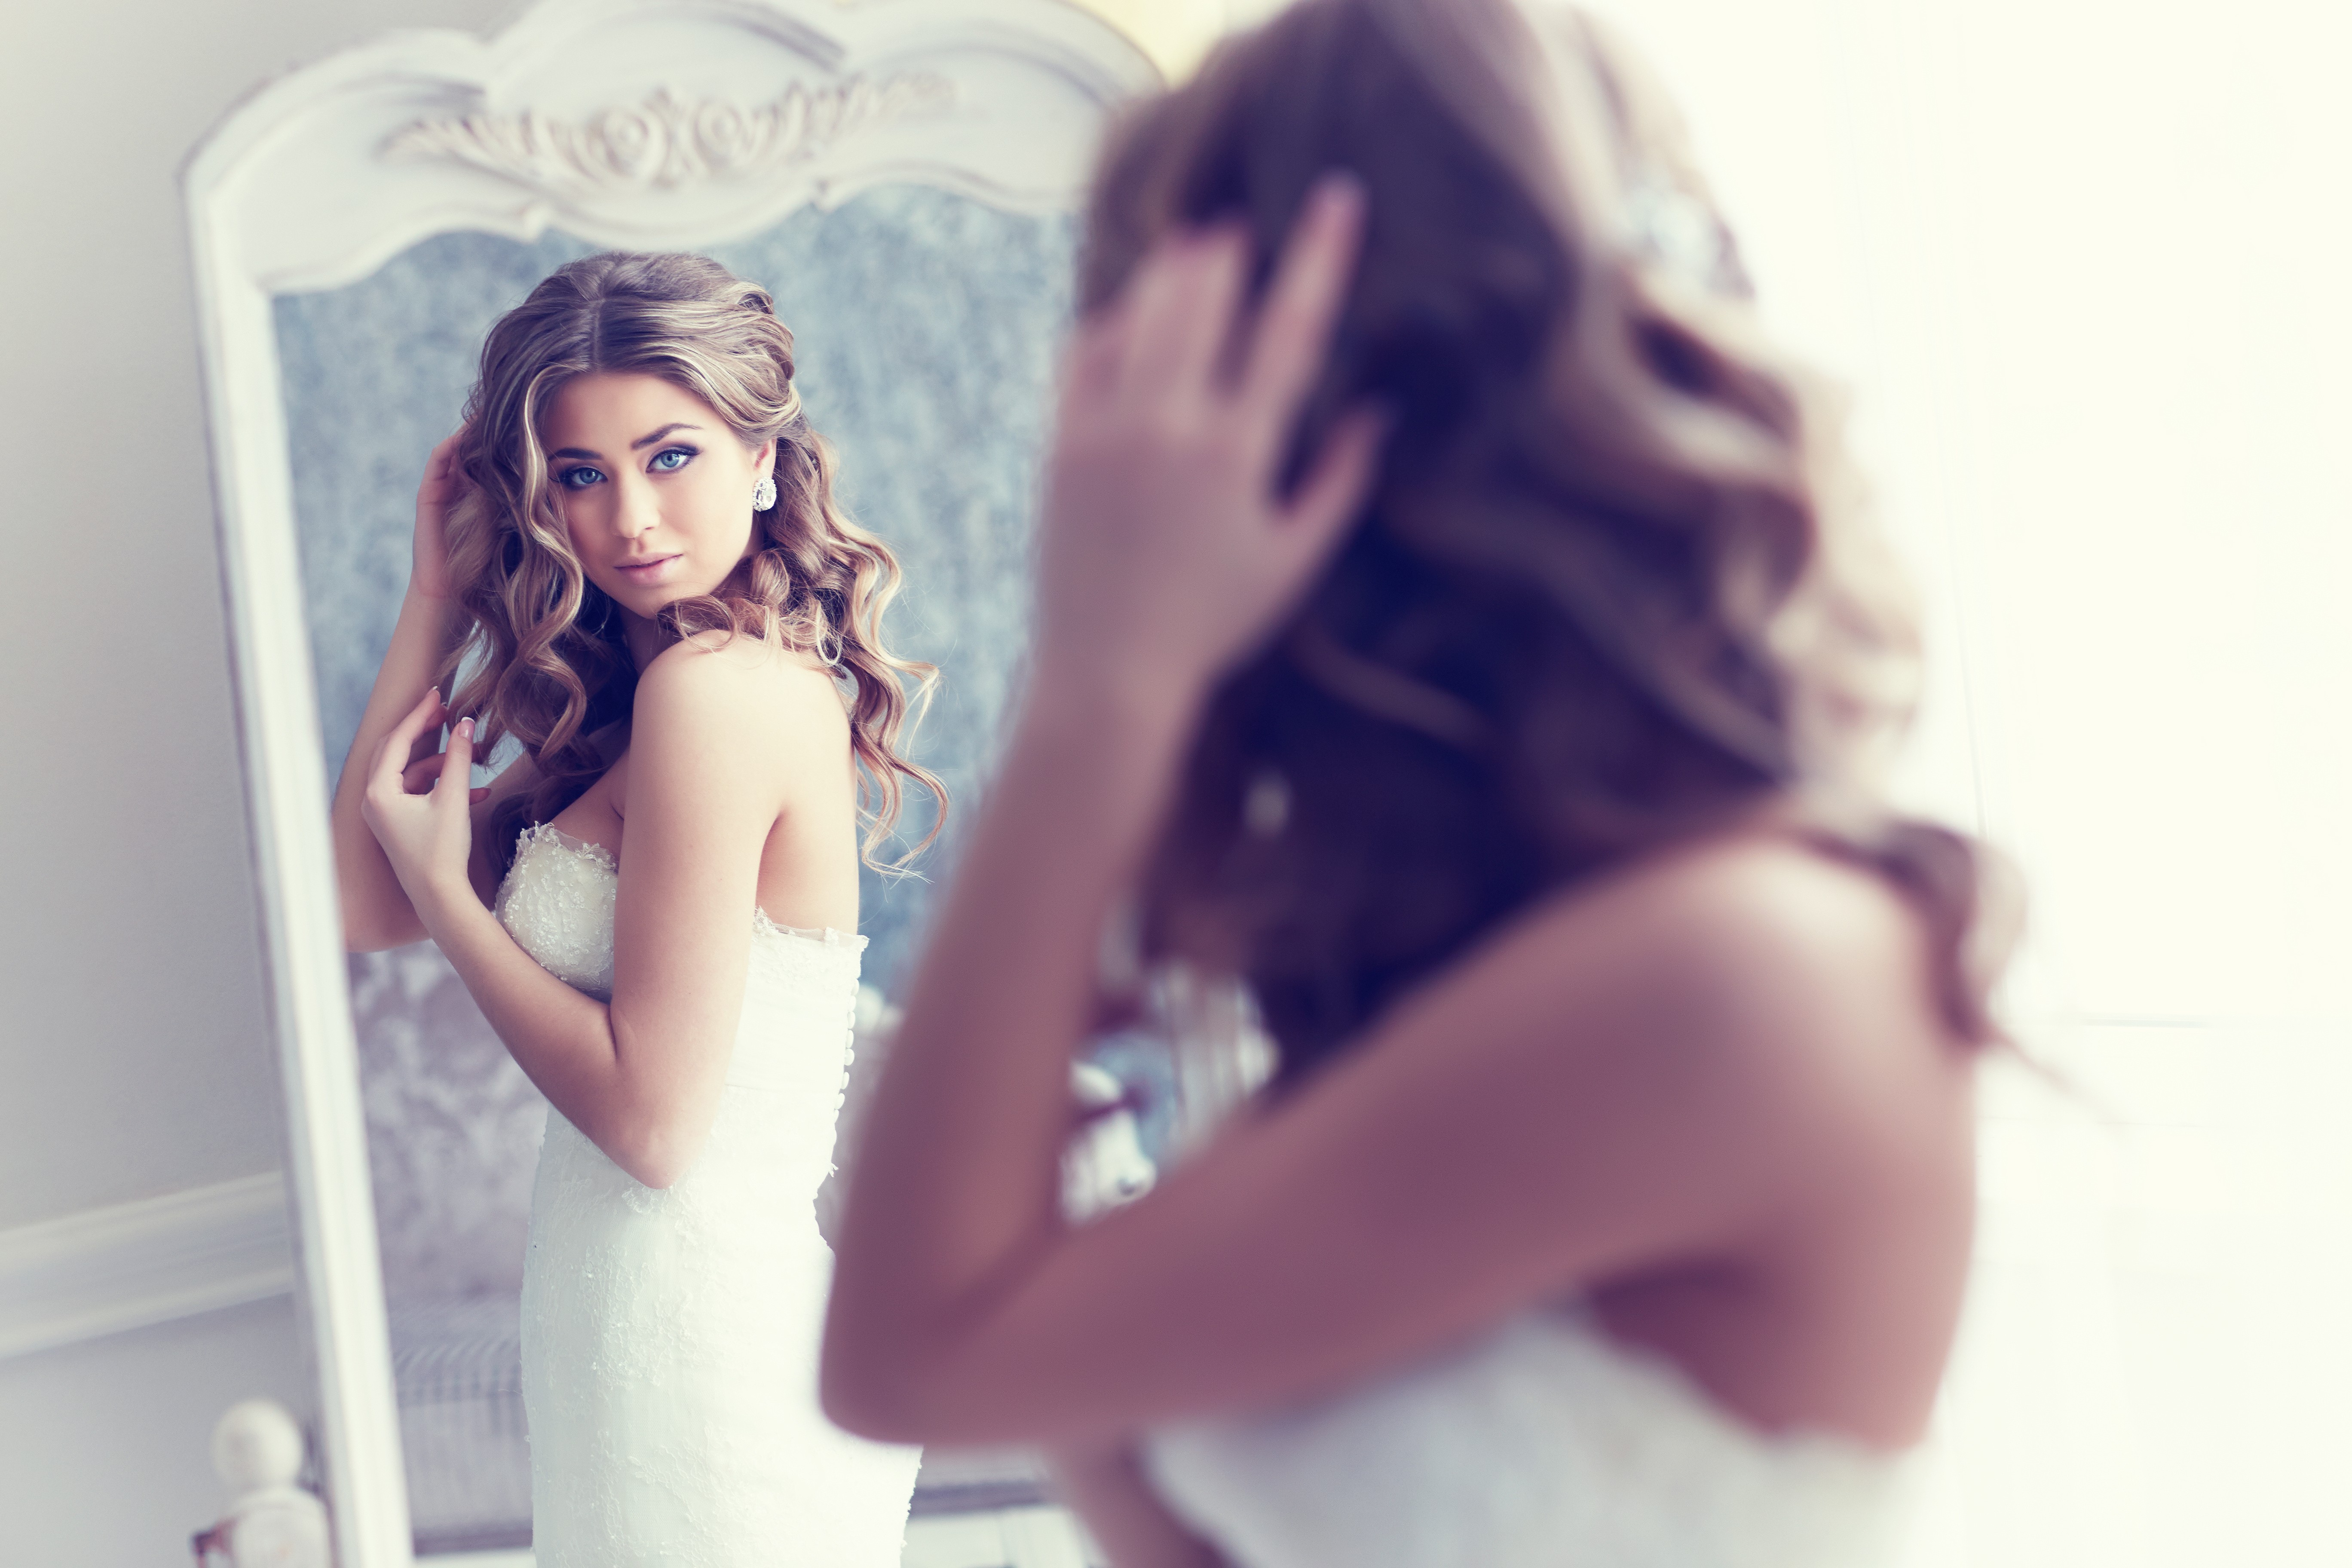 Beautiful girl in a wedding dress looks in the mirror wallpapers and images  wallpapers  